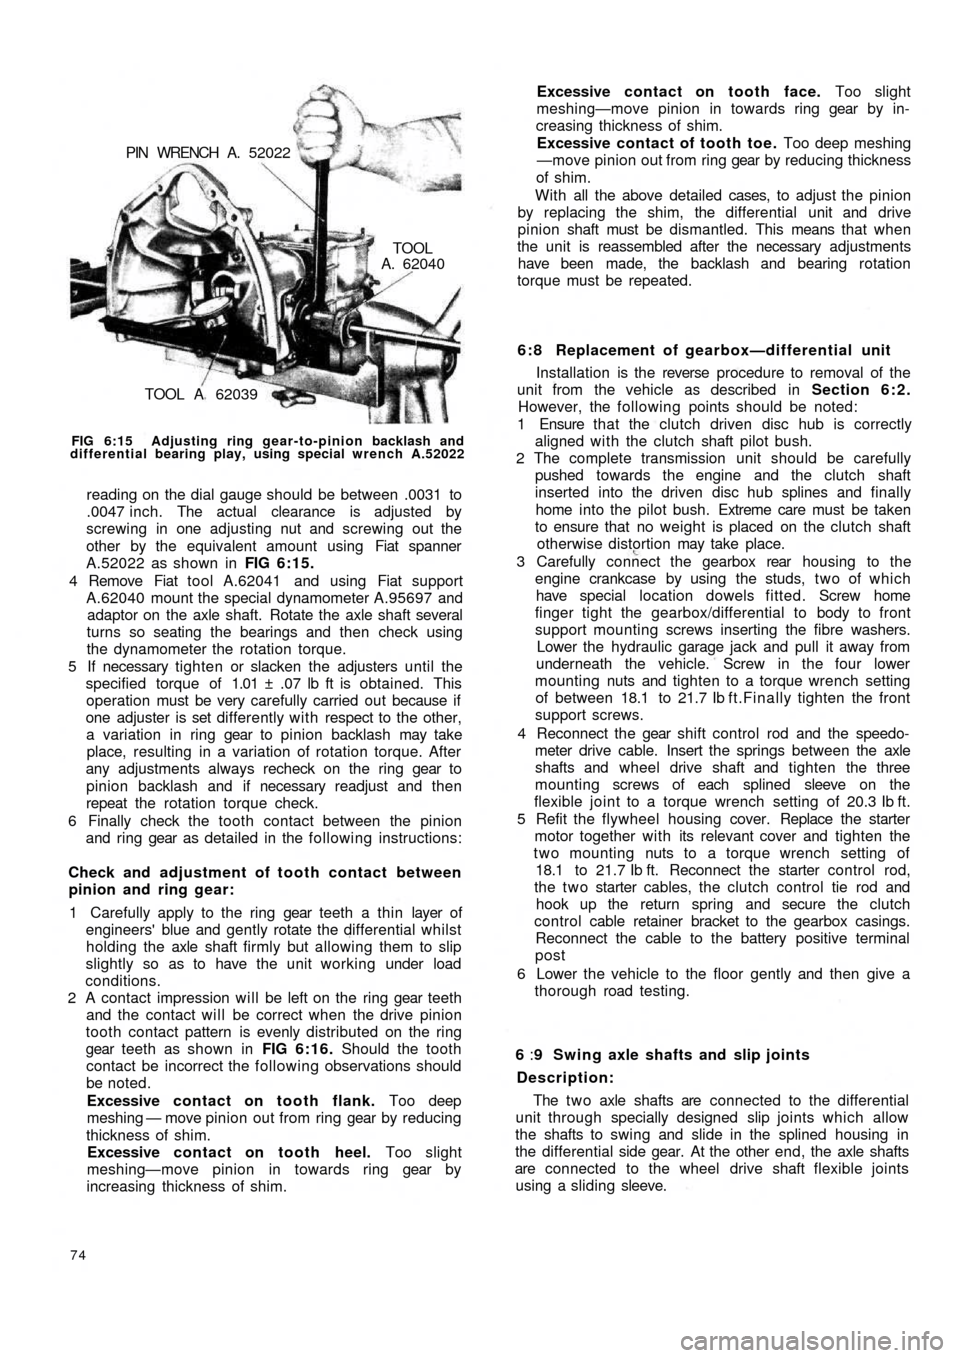 FIAT 500 1972 1.G Workshop Manual TOOL A  62039
TOOLA. 62040 PIN  WRENCH  A.  52022
FIG 6:15  Adjusting ring gear-to-pinion backlash and
differential bearing play, using special wrench A.52022
reading on the dial gauge should be betwe